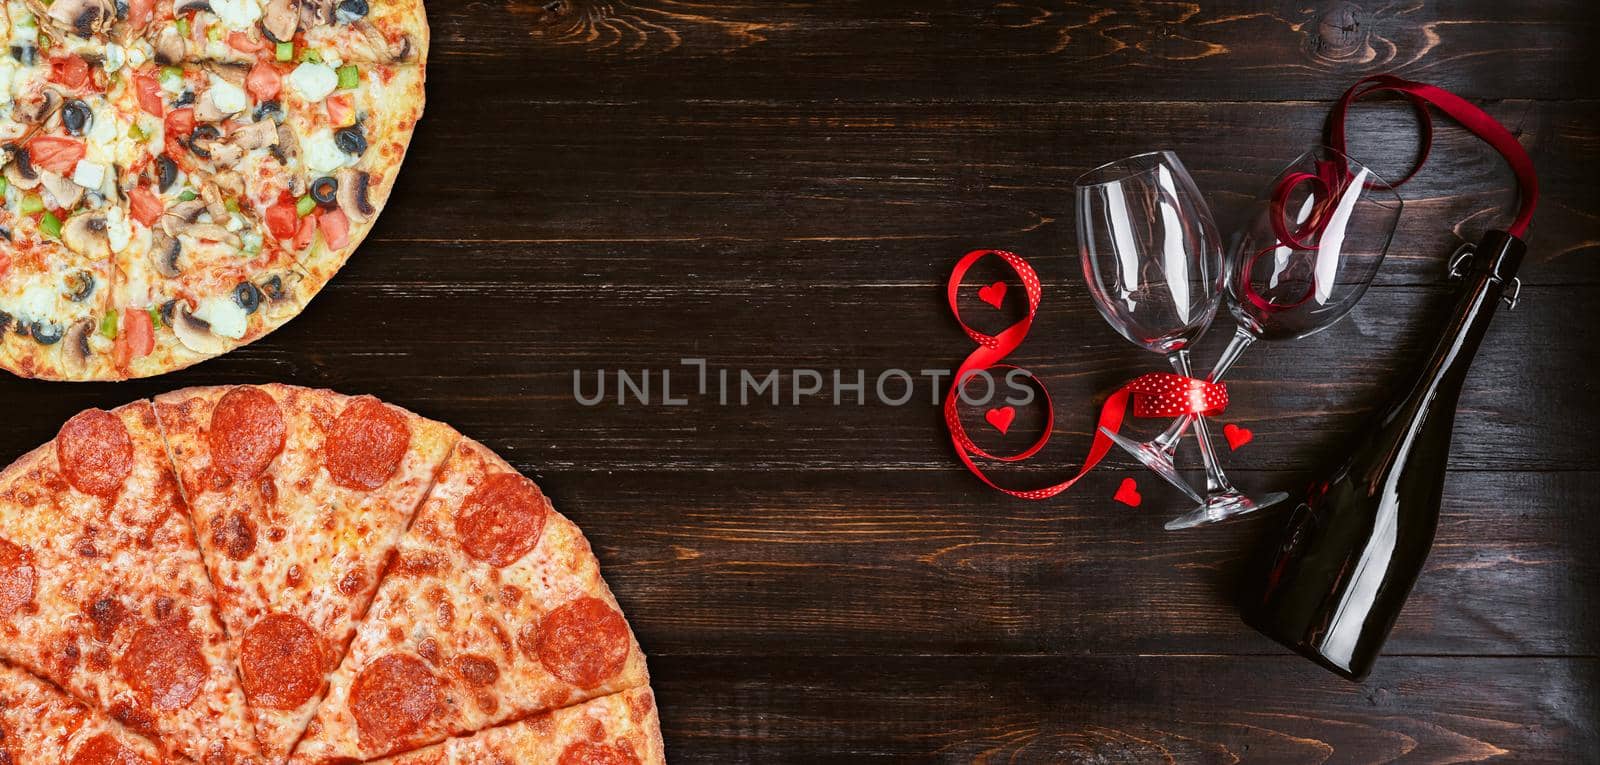 dinner for two in honor of Valentine's Day with pizza and wine.